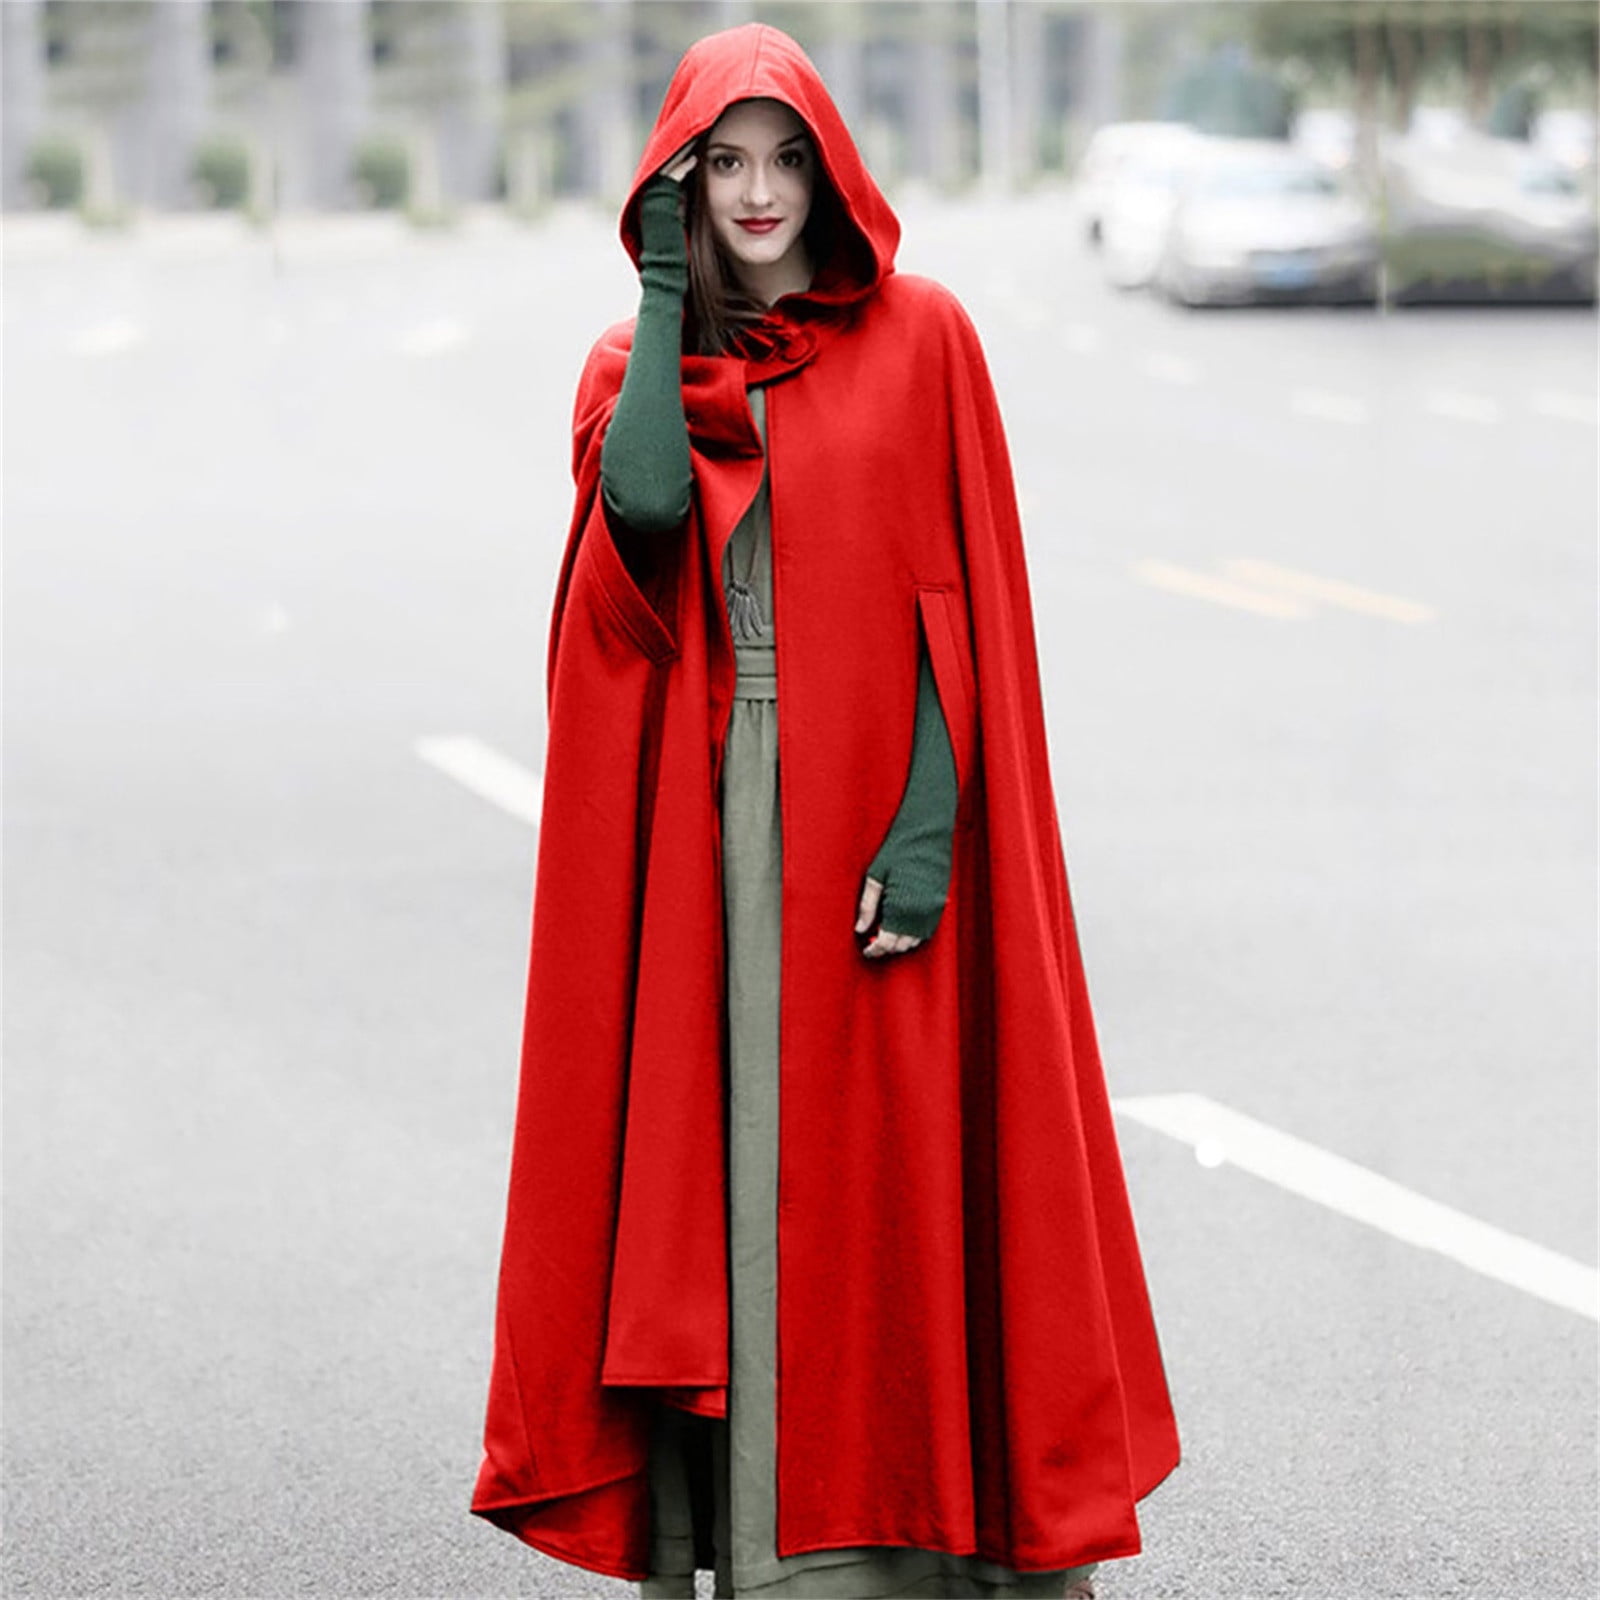 Hfyihgf Womens Gothic Hooded Open Front Poncho Cape Coat Winter Wool Blend  Maxi Outwear Jacket Cloak Red XL